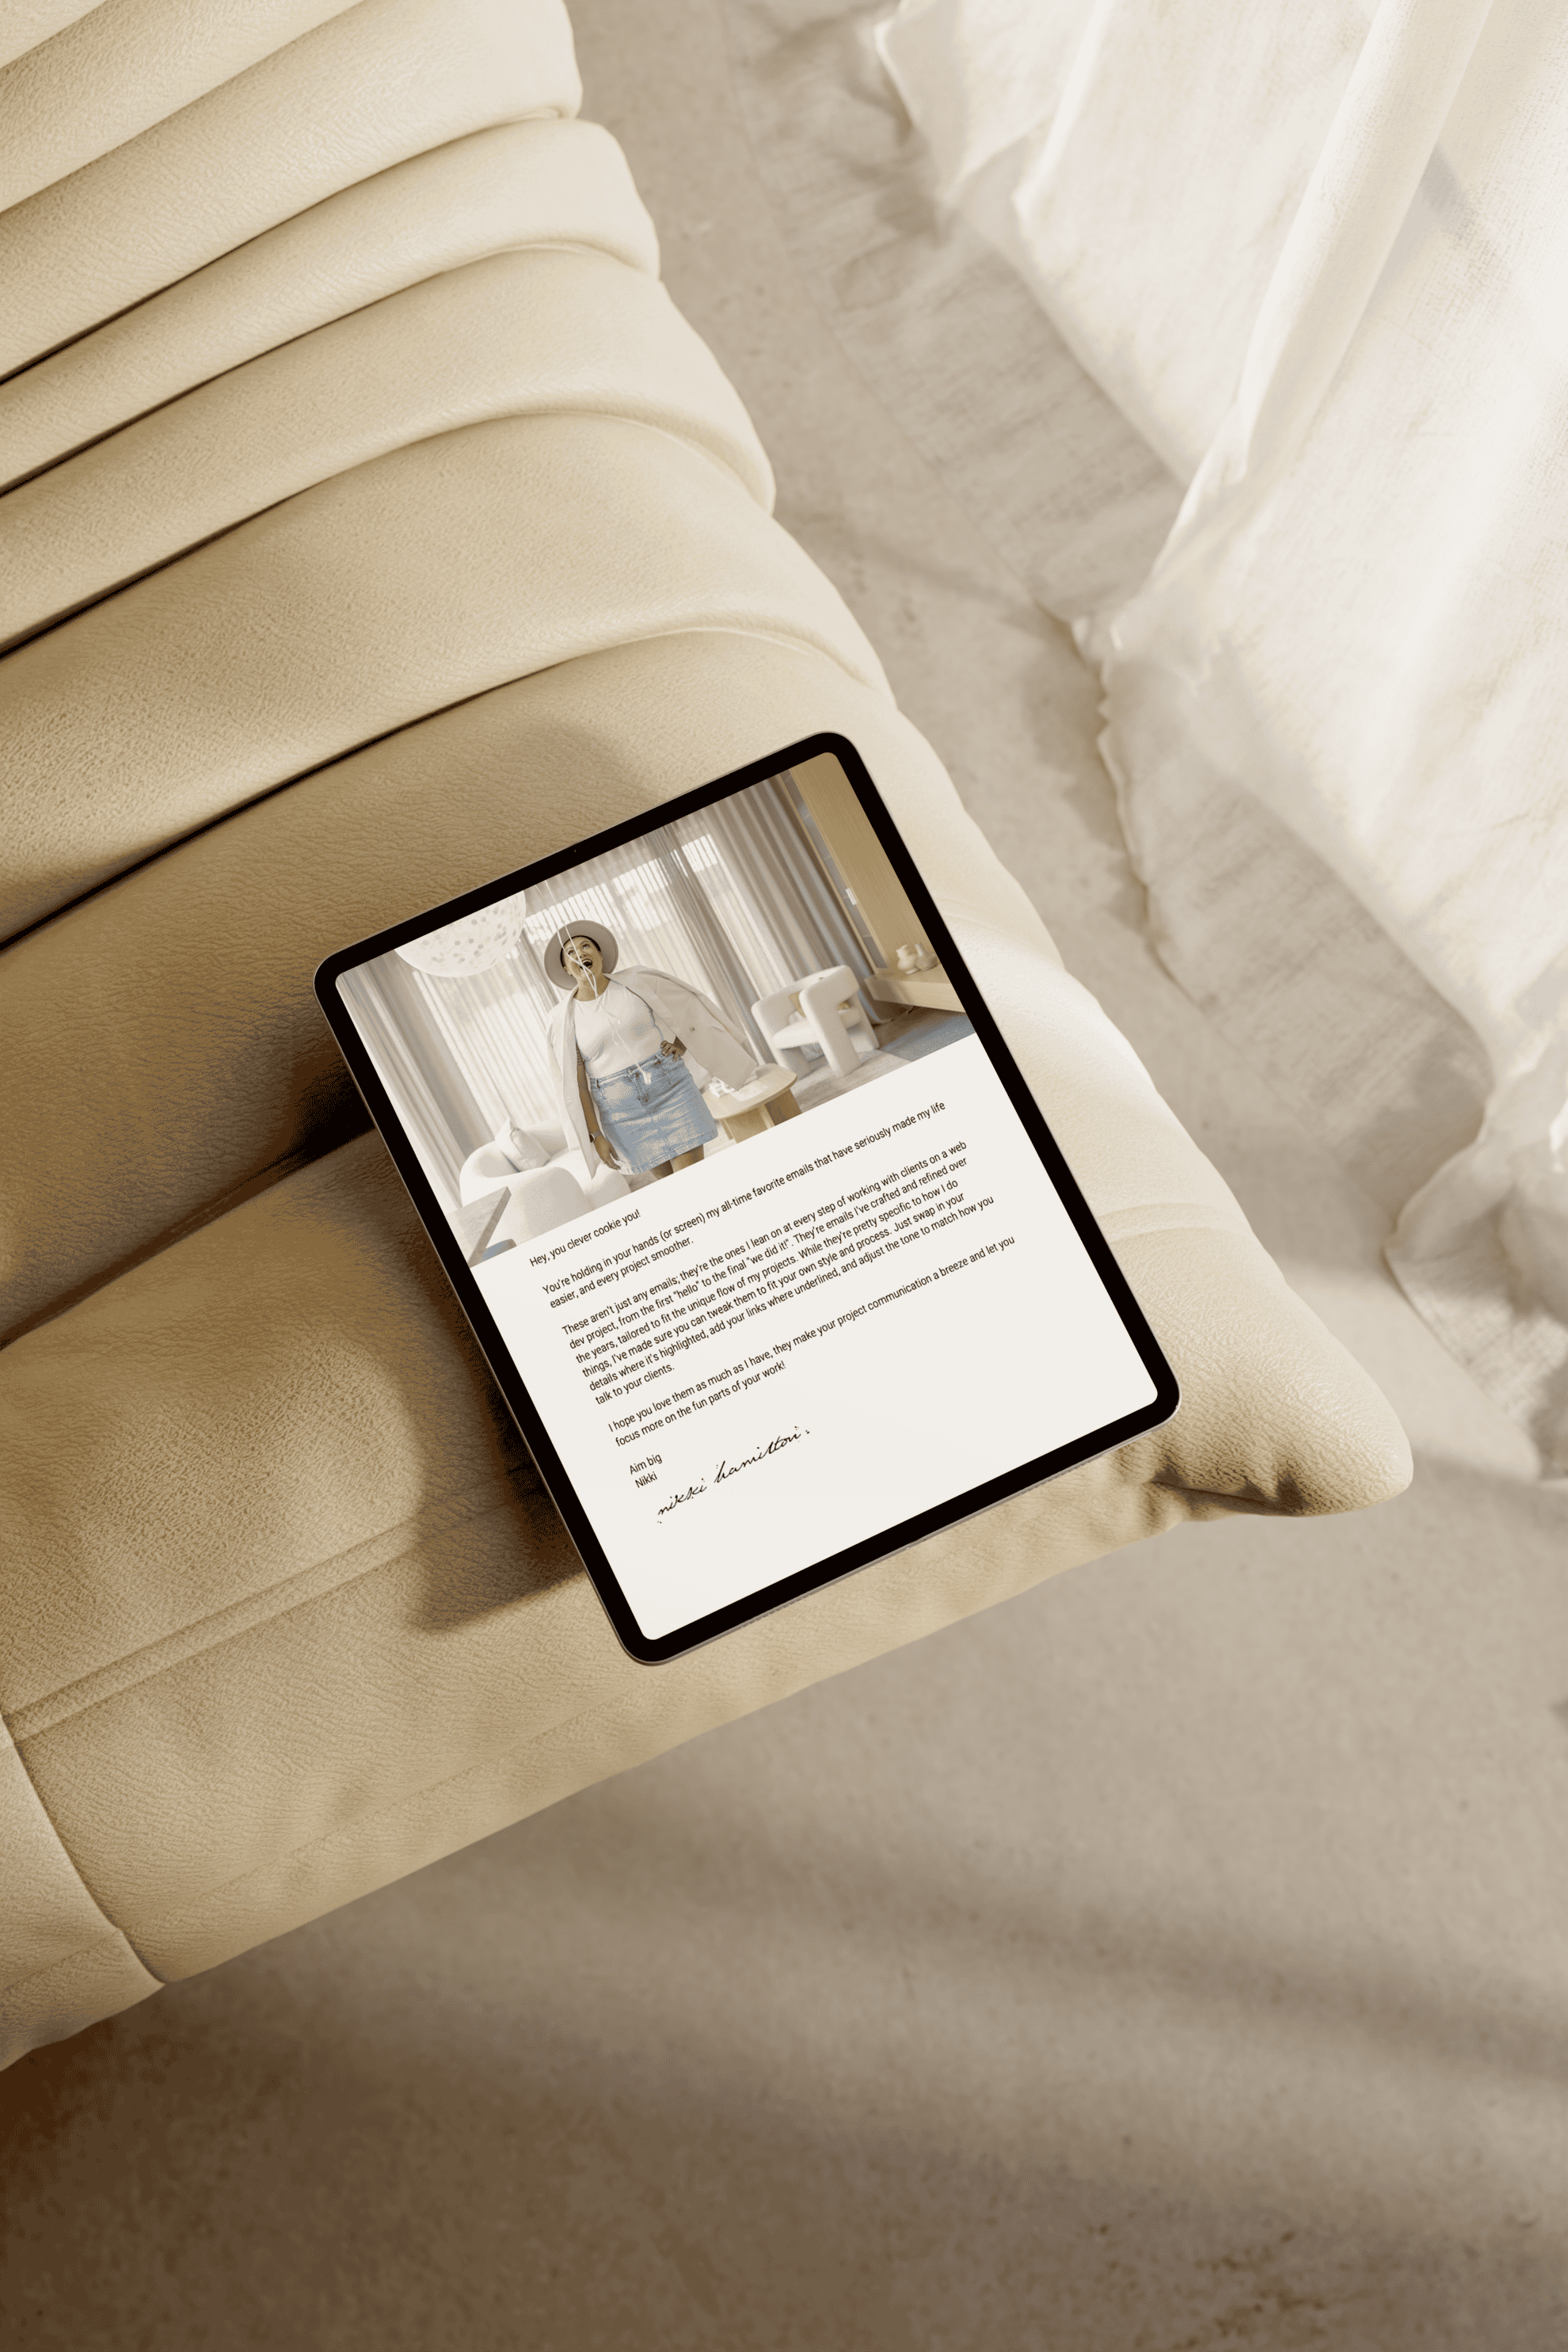 Tablet displaying a blog article with a photo of a woman in a cozy room, placed on a beige sofa beside a white pillow.